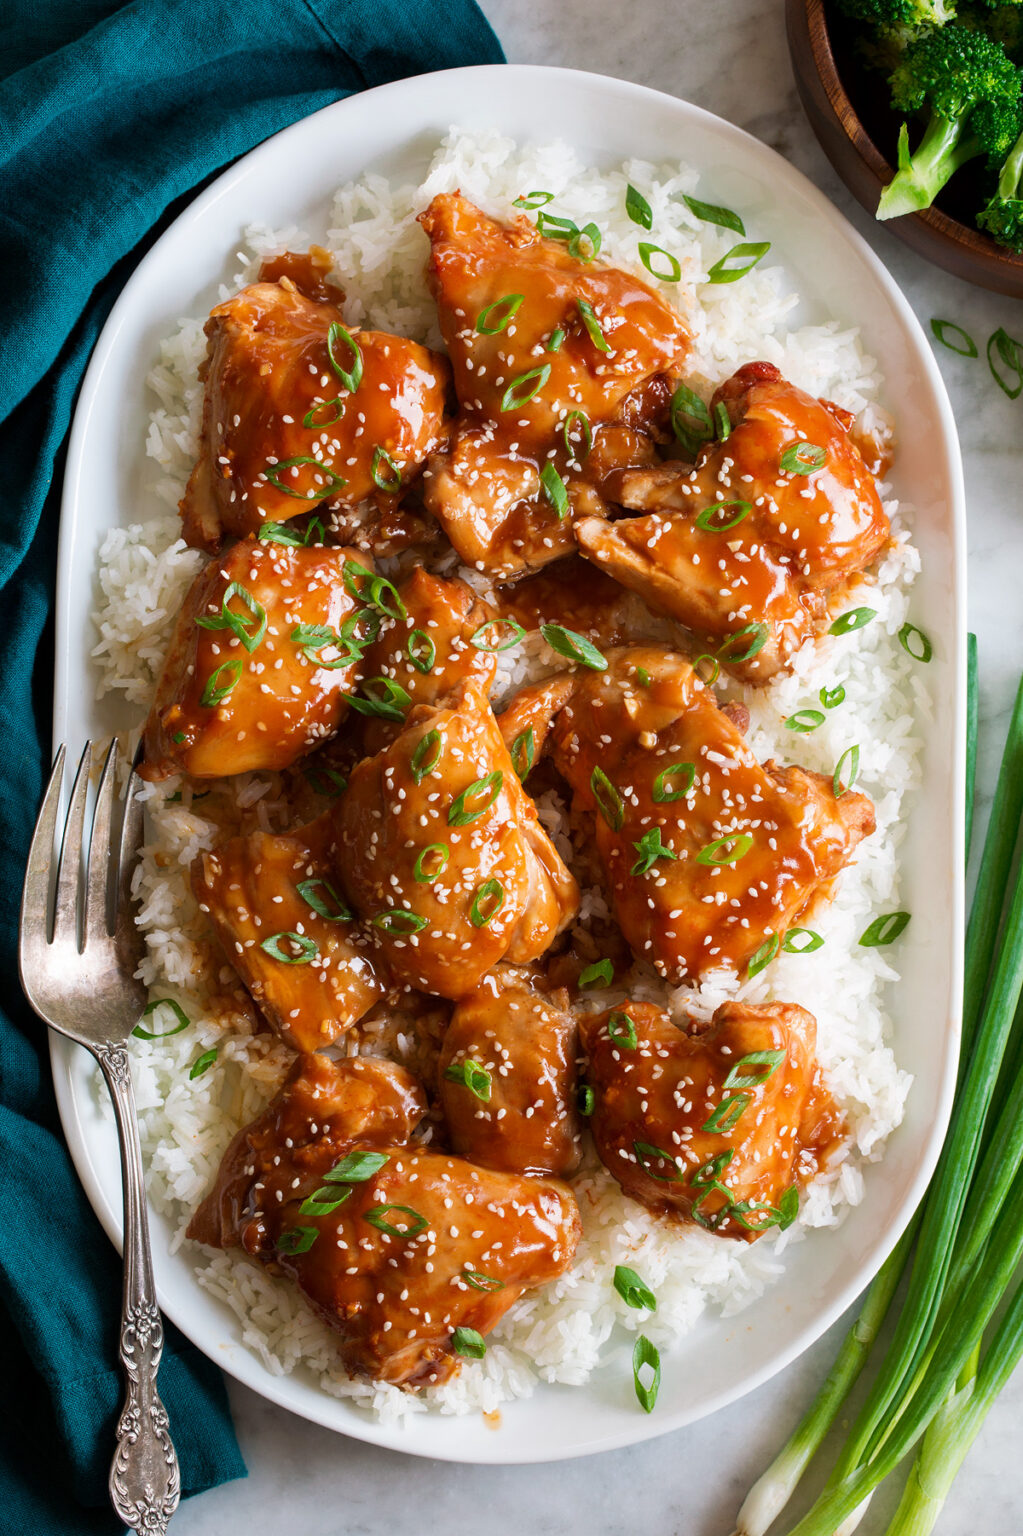 Slow Cooker Chicken Thighs Recipe - Cooking Classy